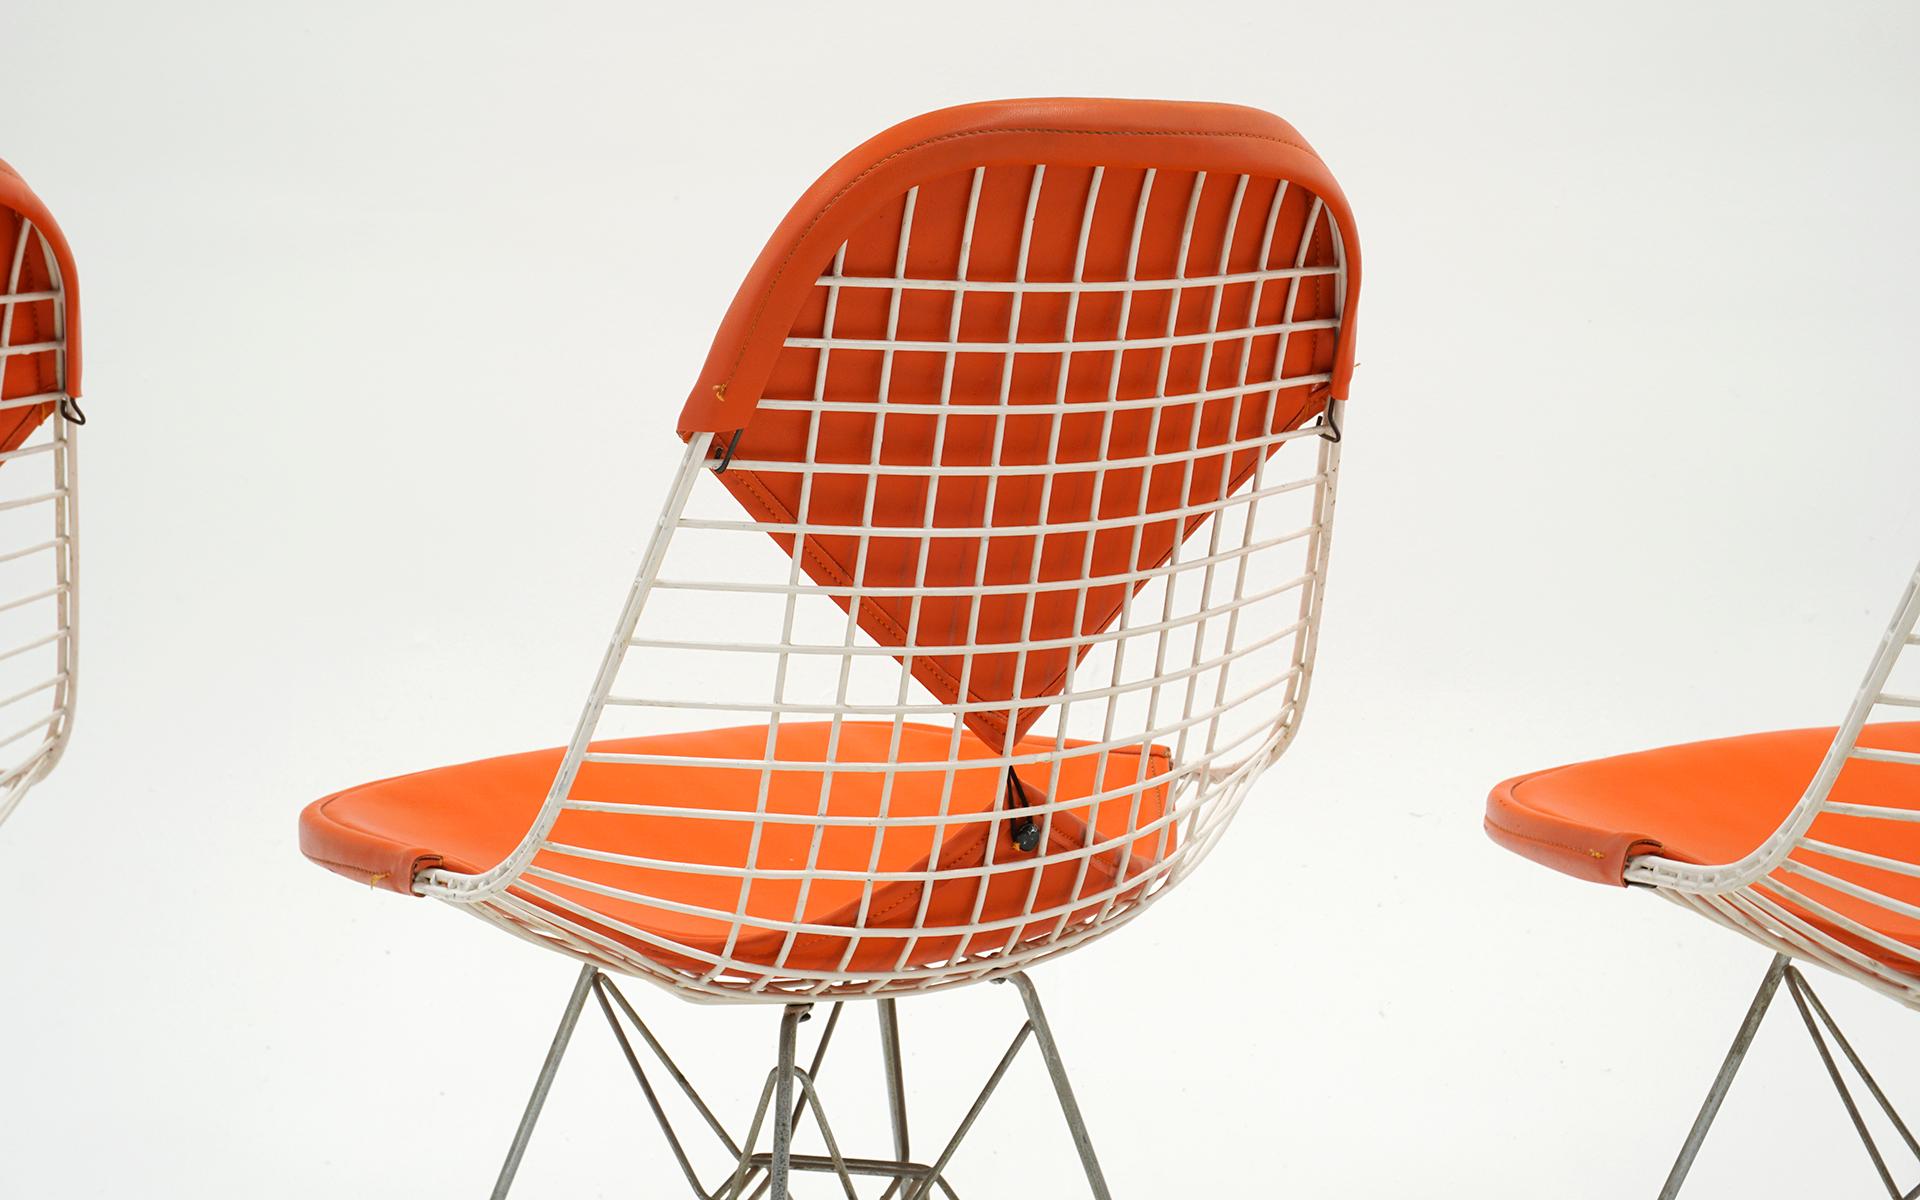 Steel Four Eames White Wire DKR Dining Chairs, Eiffel Tower Base, Orange Bikini Covers